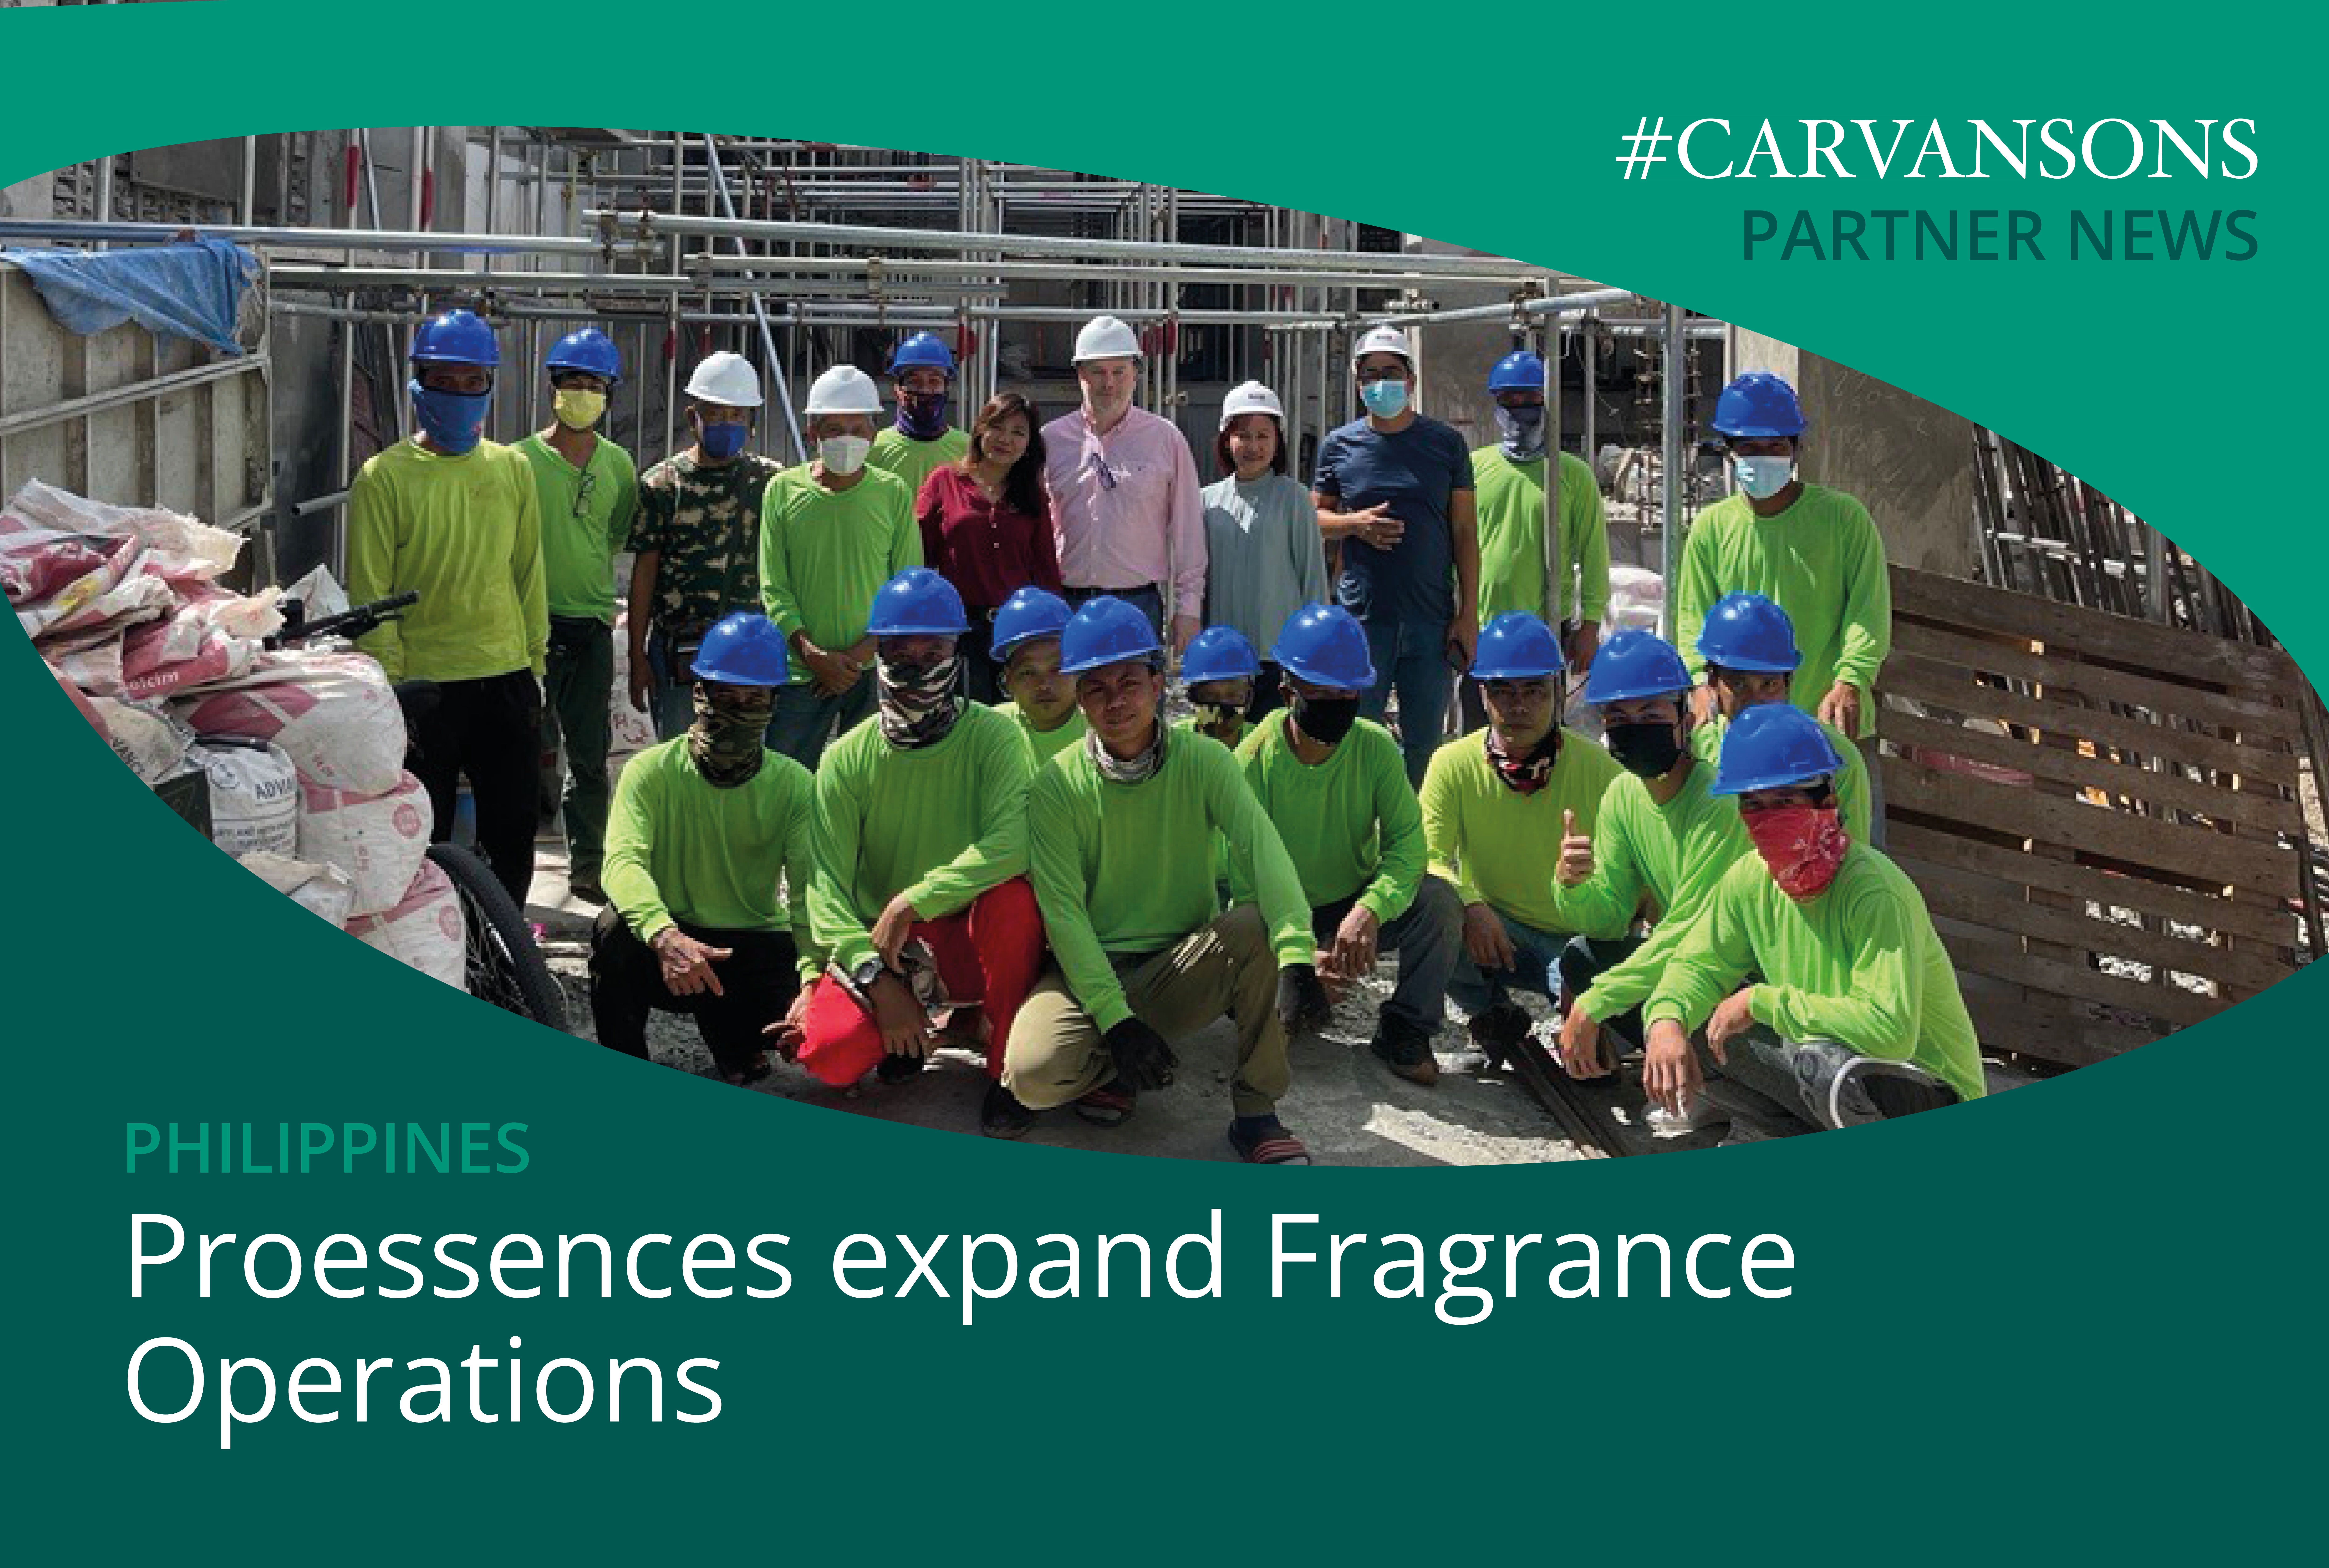 Exclusive Partner, Proessences, expand Fragrance Operations in the Philippines  